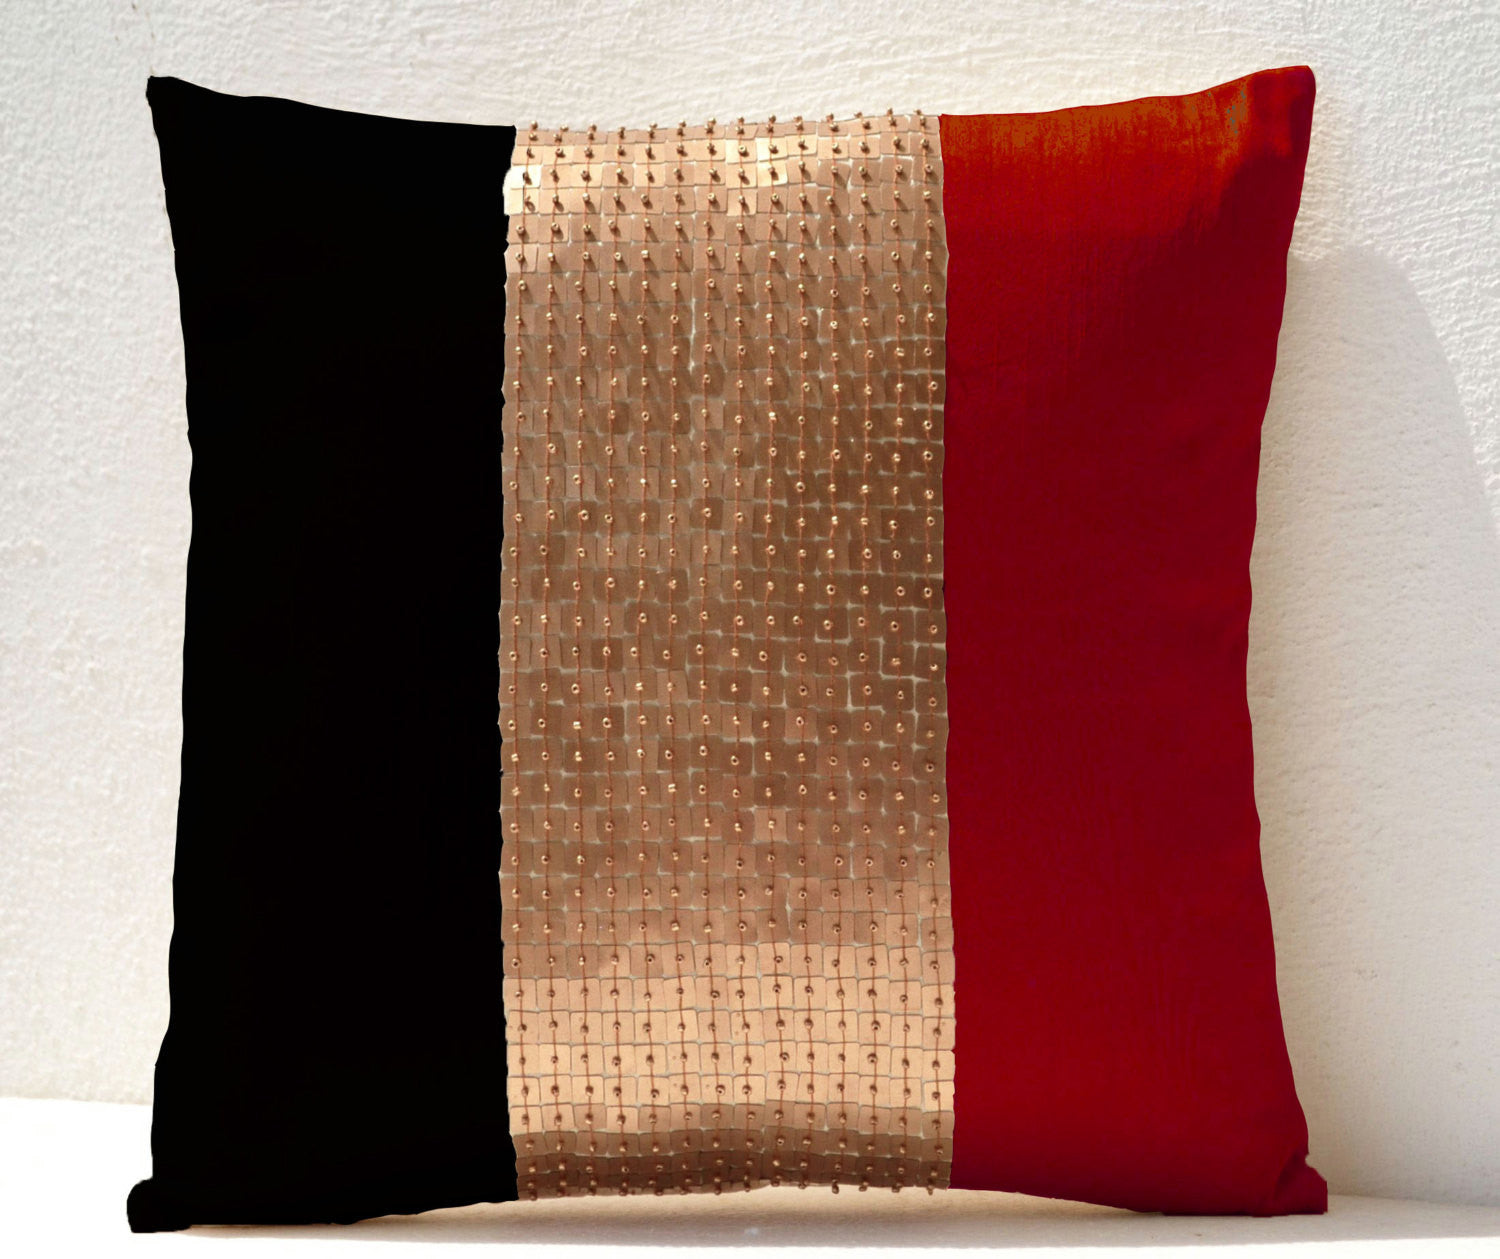 Handmade throw pillows with red black gold color block